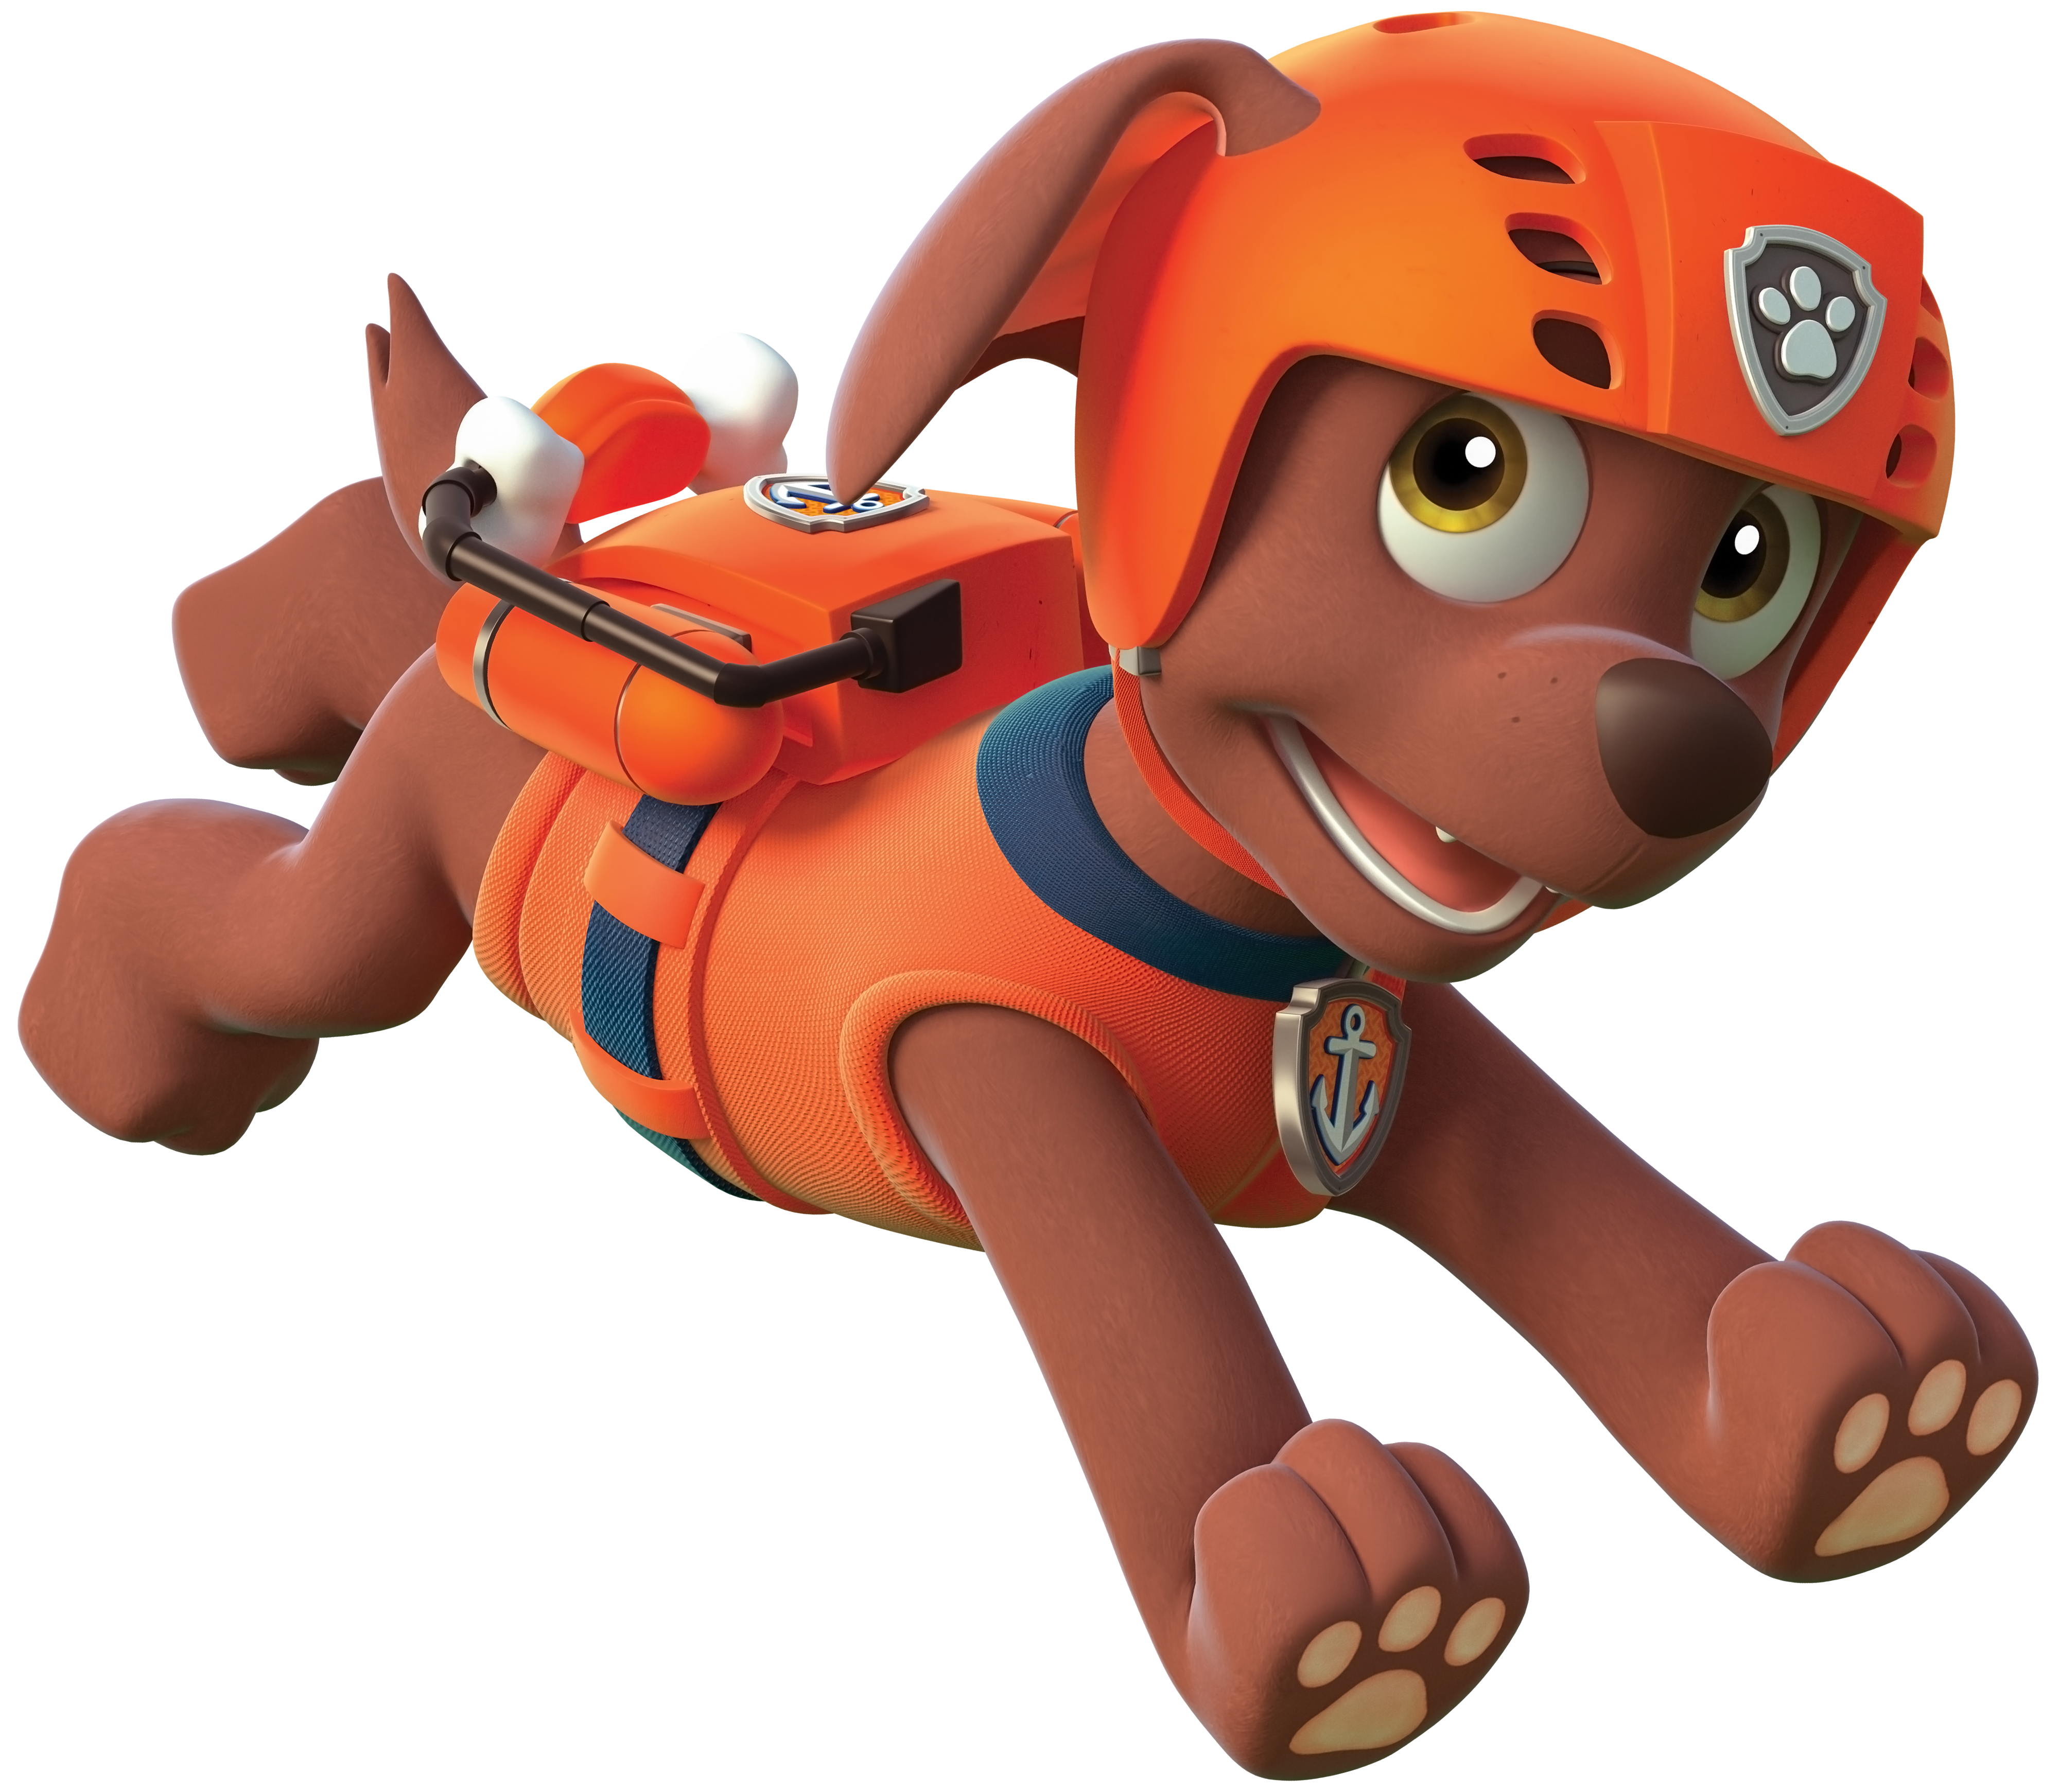 PAW Patrol Zuma PNG Cartoon Image Quality Image And Transparent PNG Free Clipart